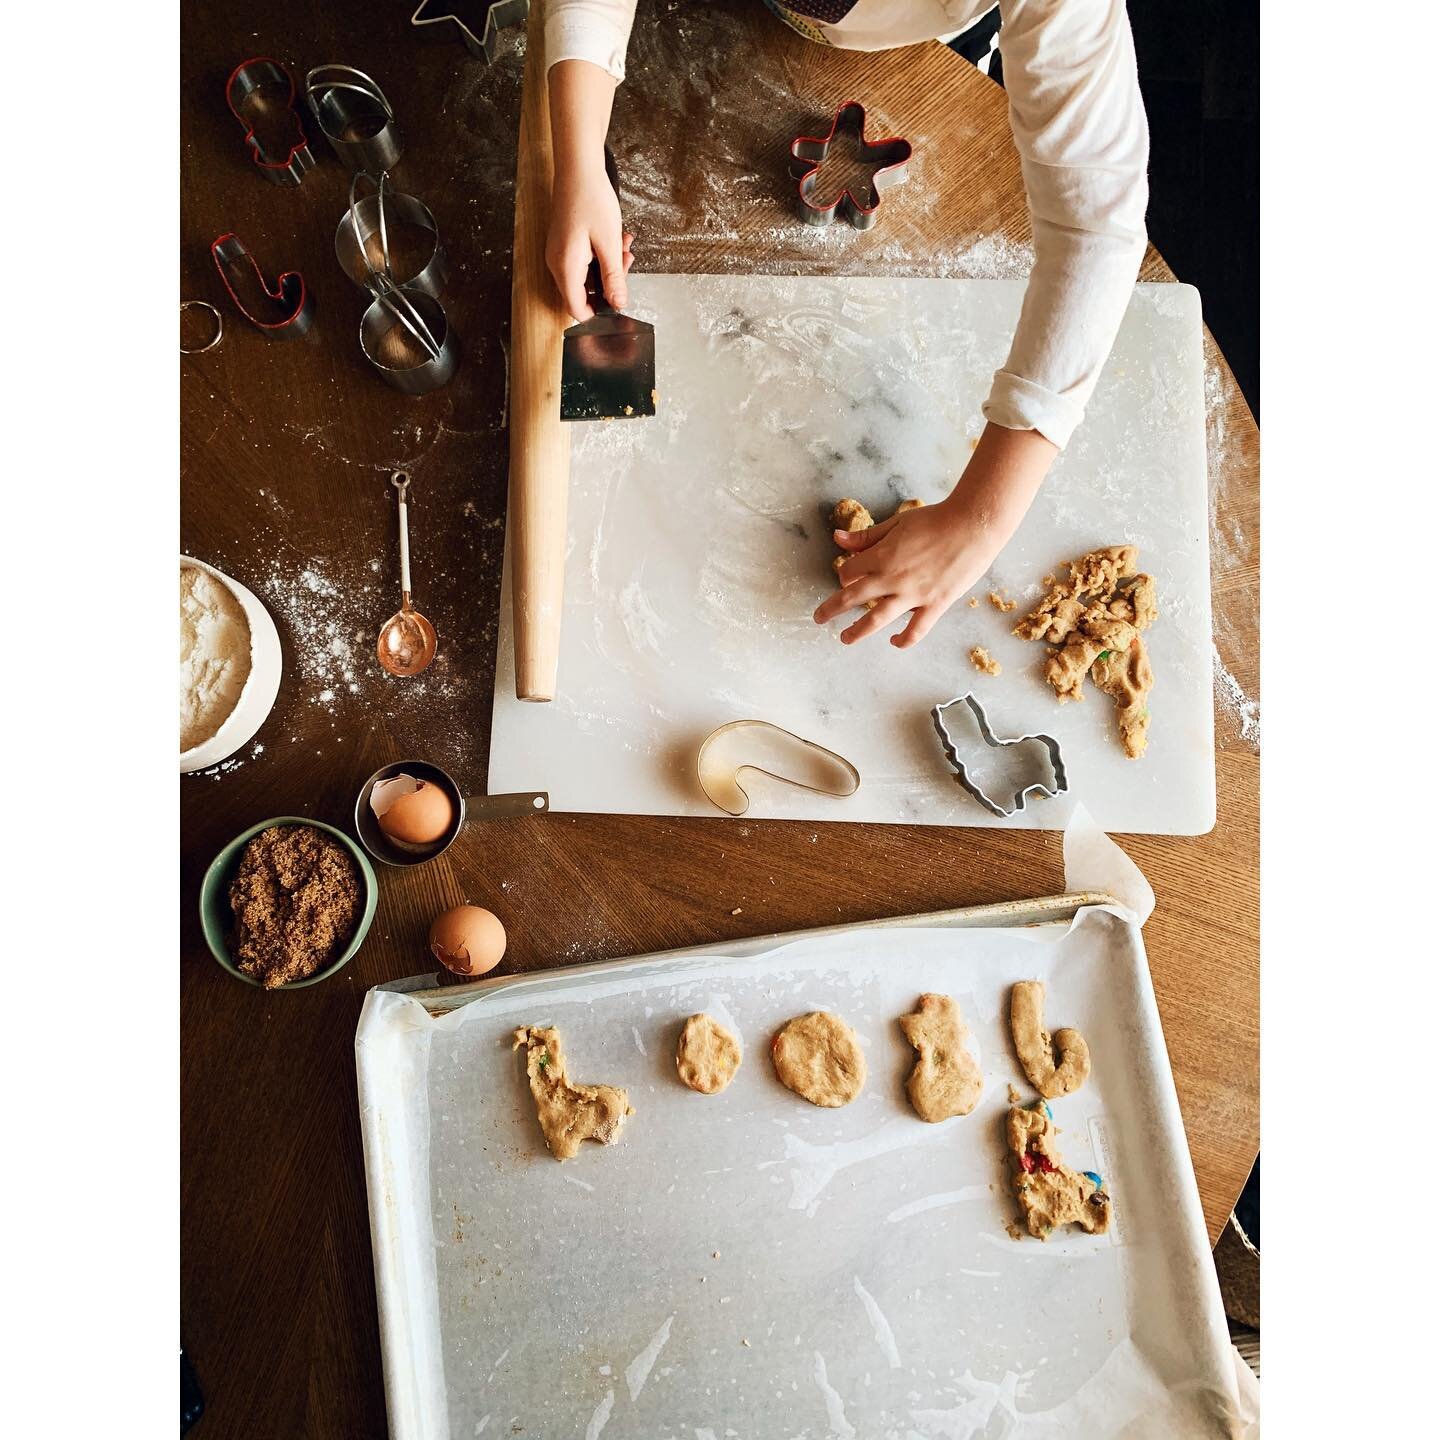 Day 83.
Winter baking mess. 
:
More from yesterday&rsquo;s adventure.
What are you baking or not baking friends?
:
:
:
:
:
:
#mycommontable #goopmake #bakedfromscratch #feedfeedglutenfree #f52community #cookit #bareaders #holidaybaking #rslove #commu